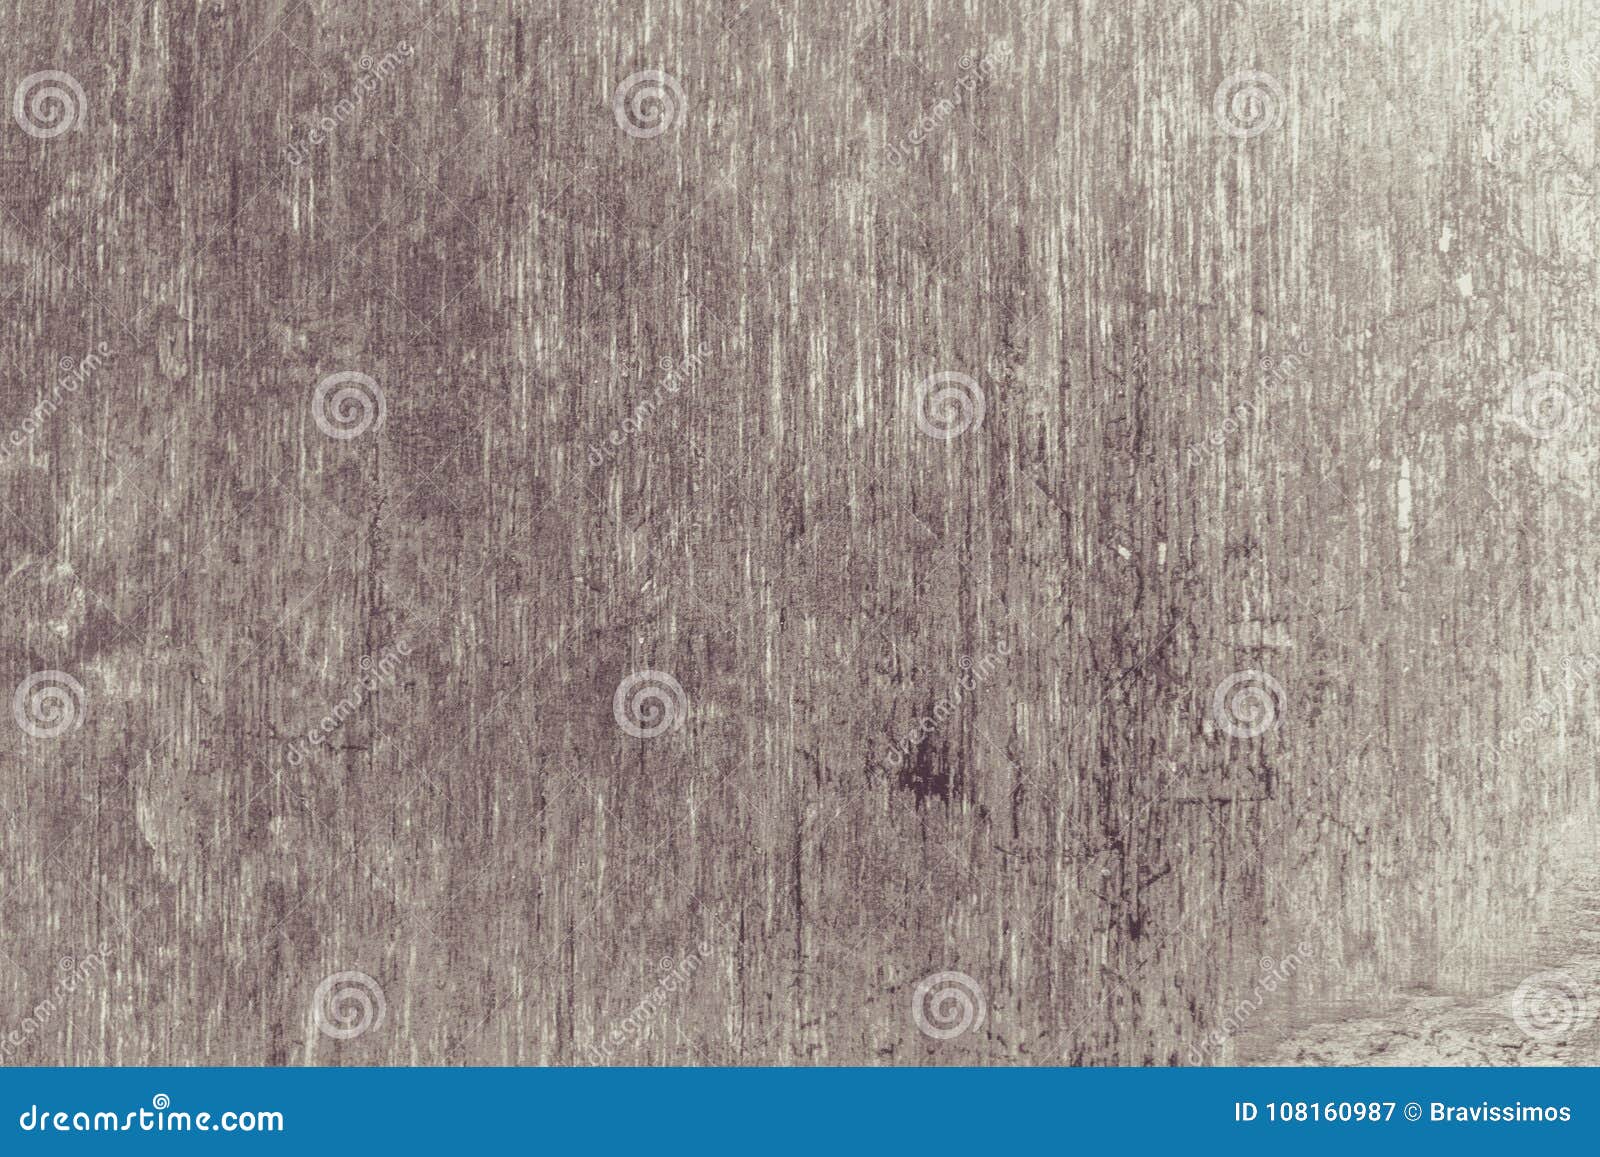 Wood Plywood Background Old Pattern Wall Plank Brown Color Texture